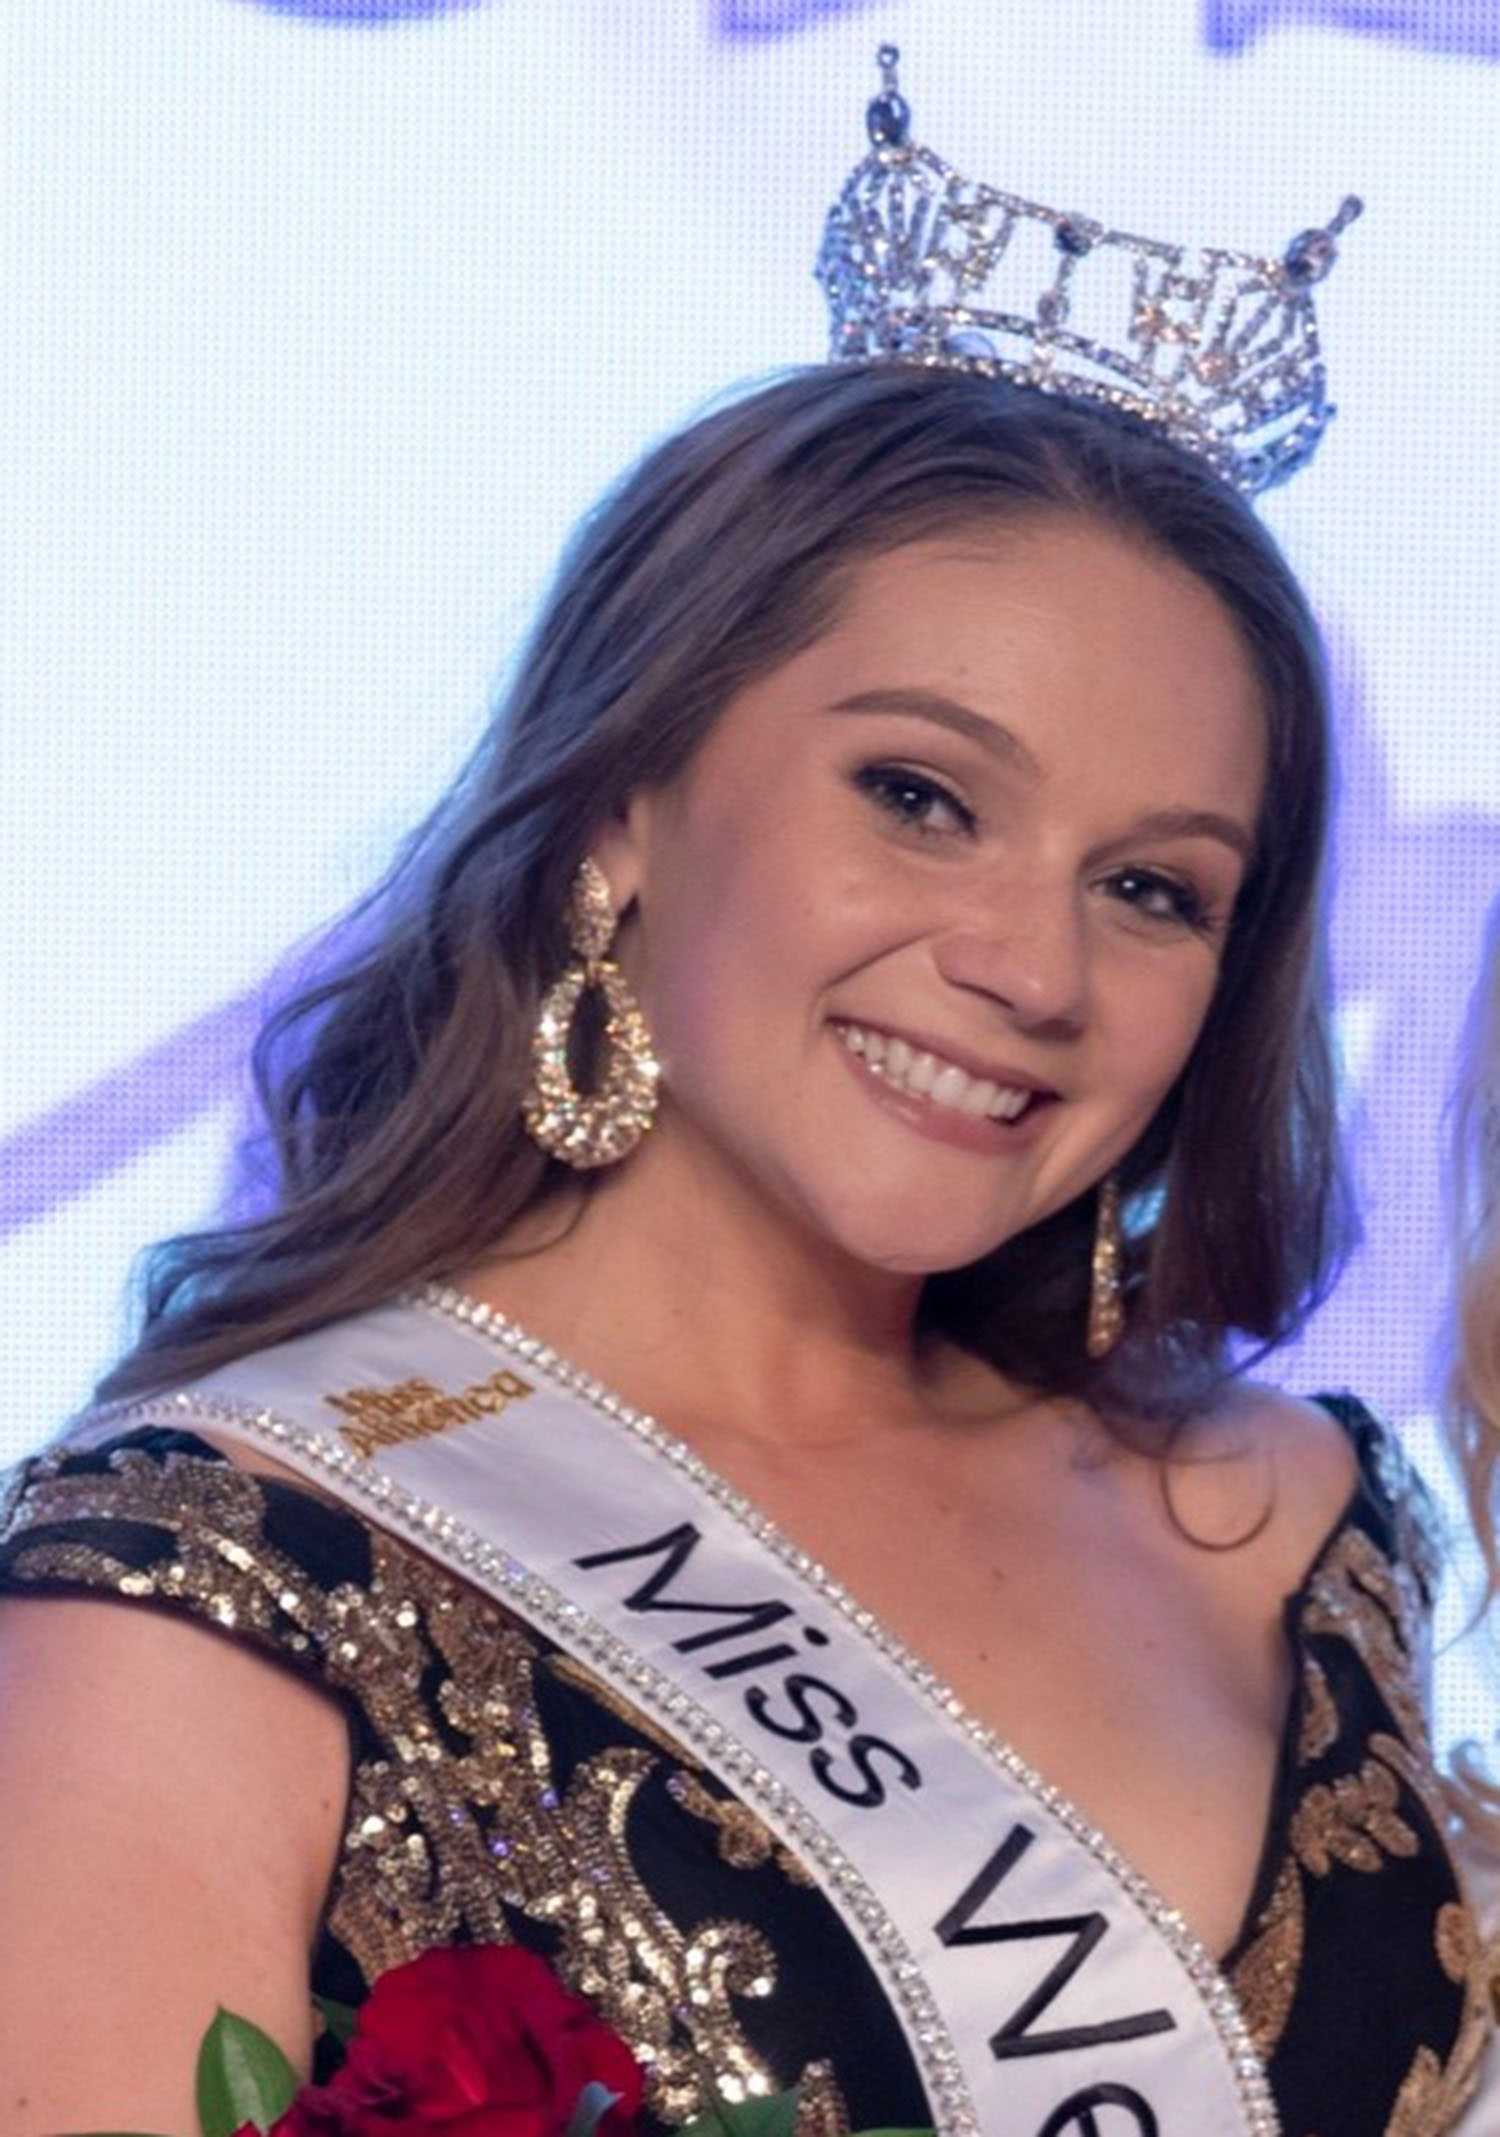 Alumna wins Miss West Virginia title, will vie for Miss America